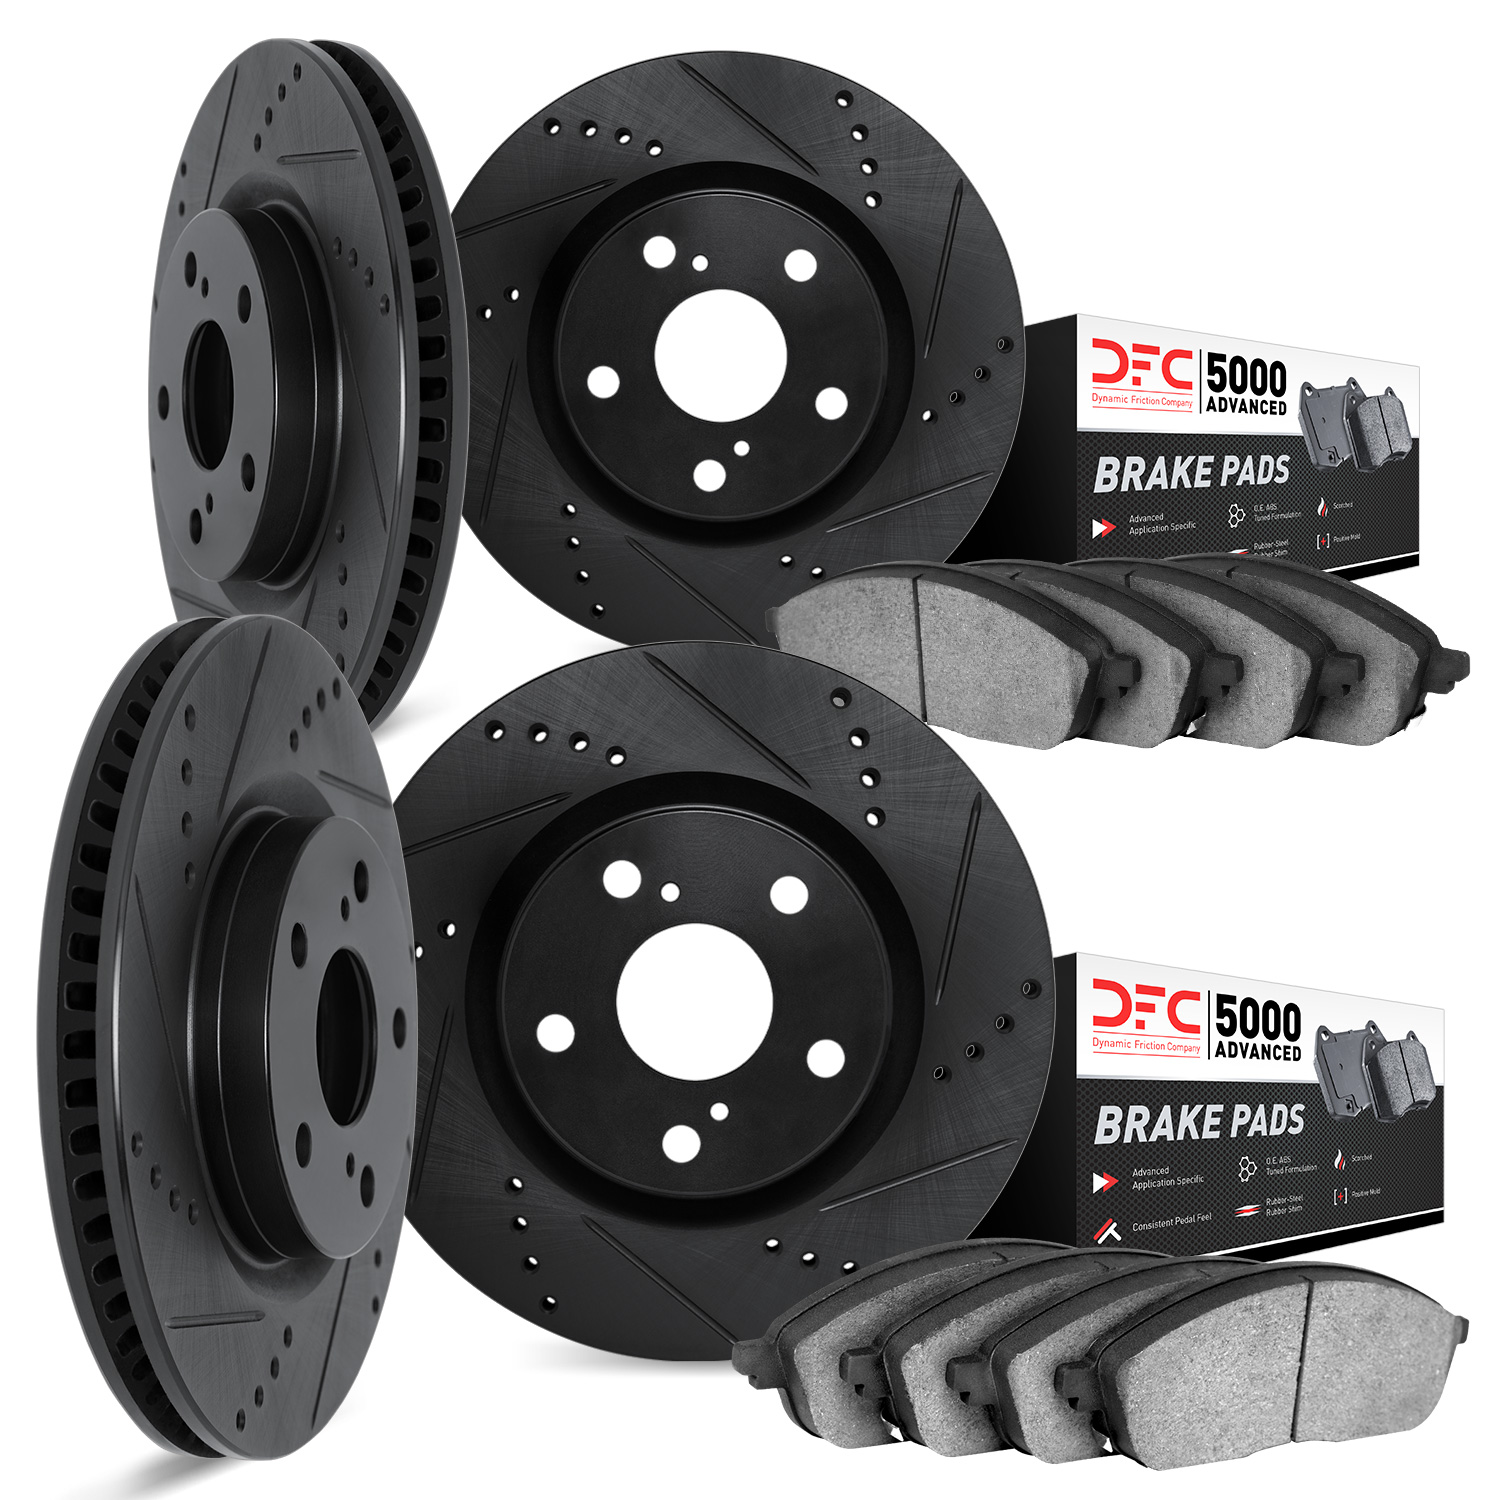 8504-74082 Drilled/Slotted Brake Rotors w/5000 Advanced Brake Pads Kit [Black], 2008-2009 Audi/Volkswagen, Position: Front and R